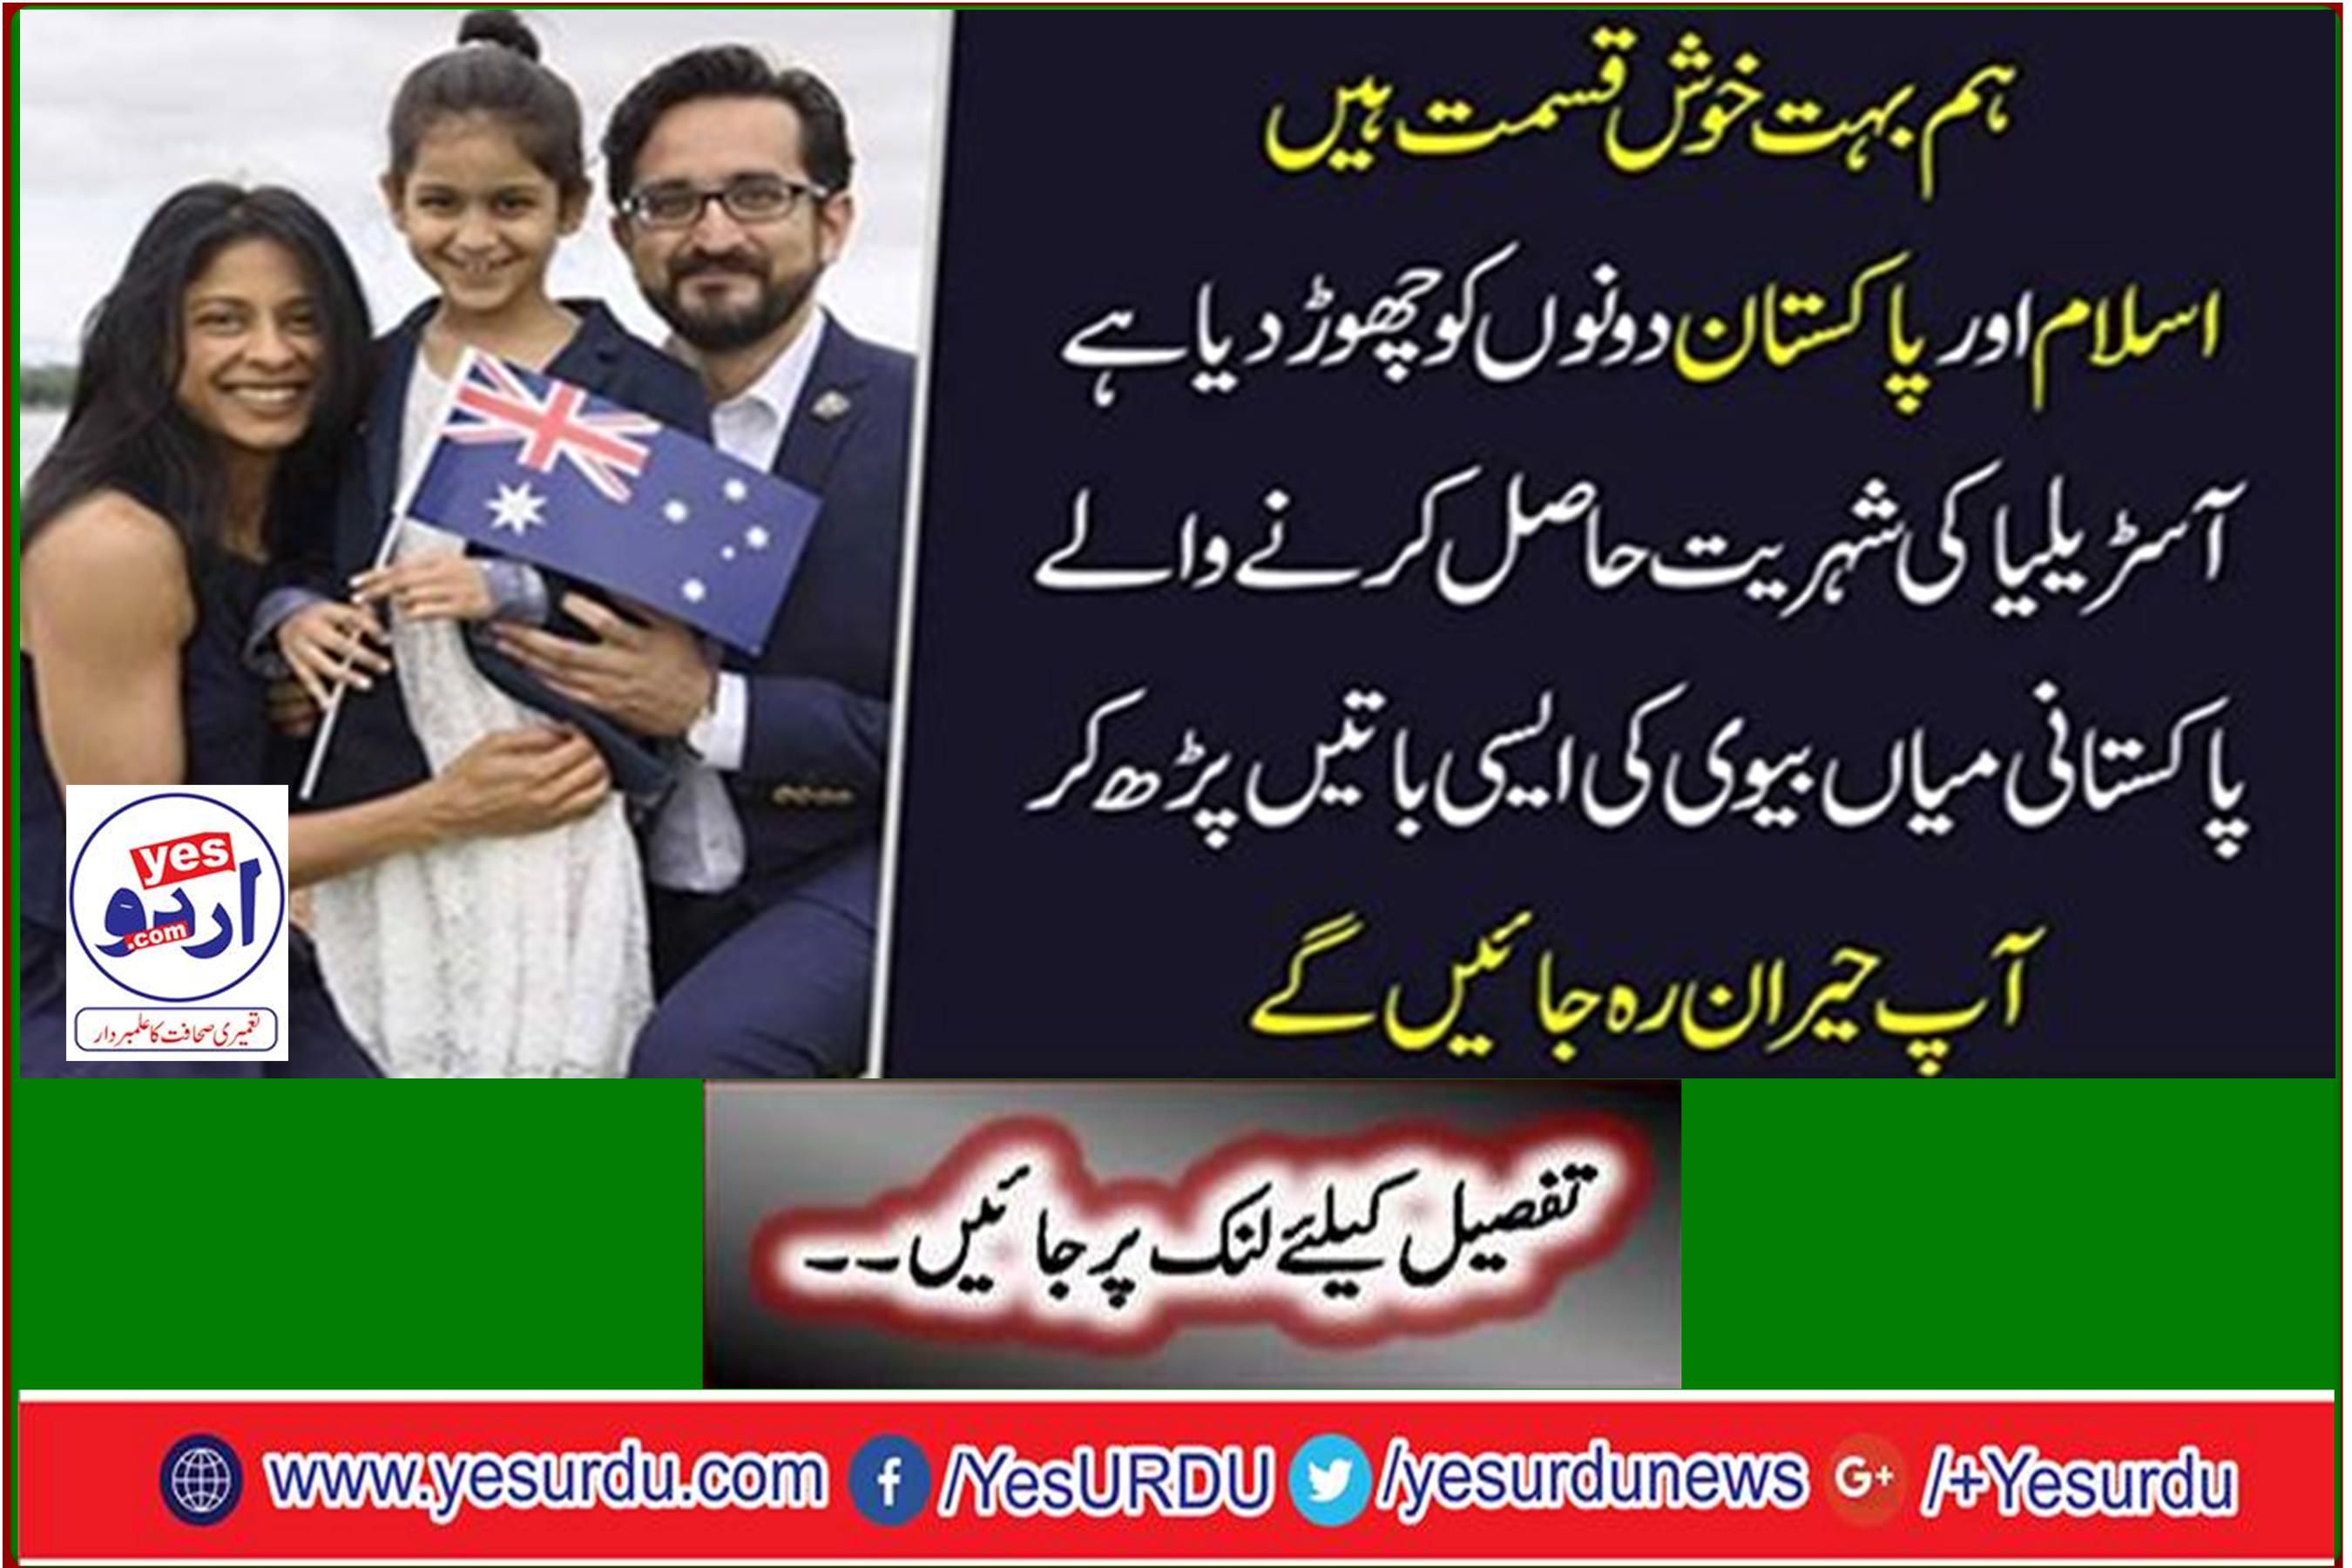 We are very fortunate to have left both Islam and Pakistan. Why did Pakistani spouses who have Australian citizenship do this and who are they? Learn in this news